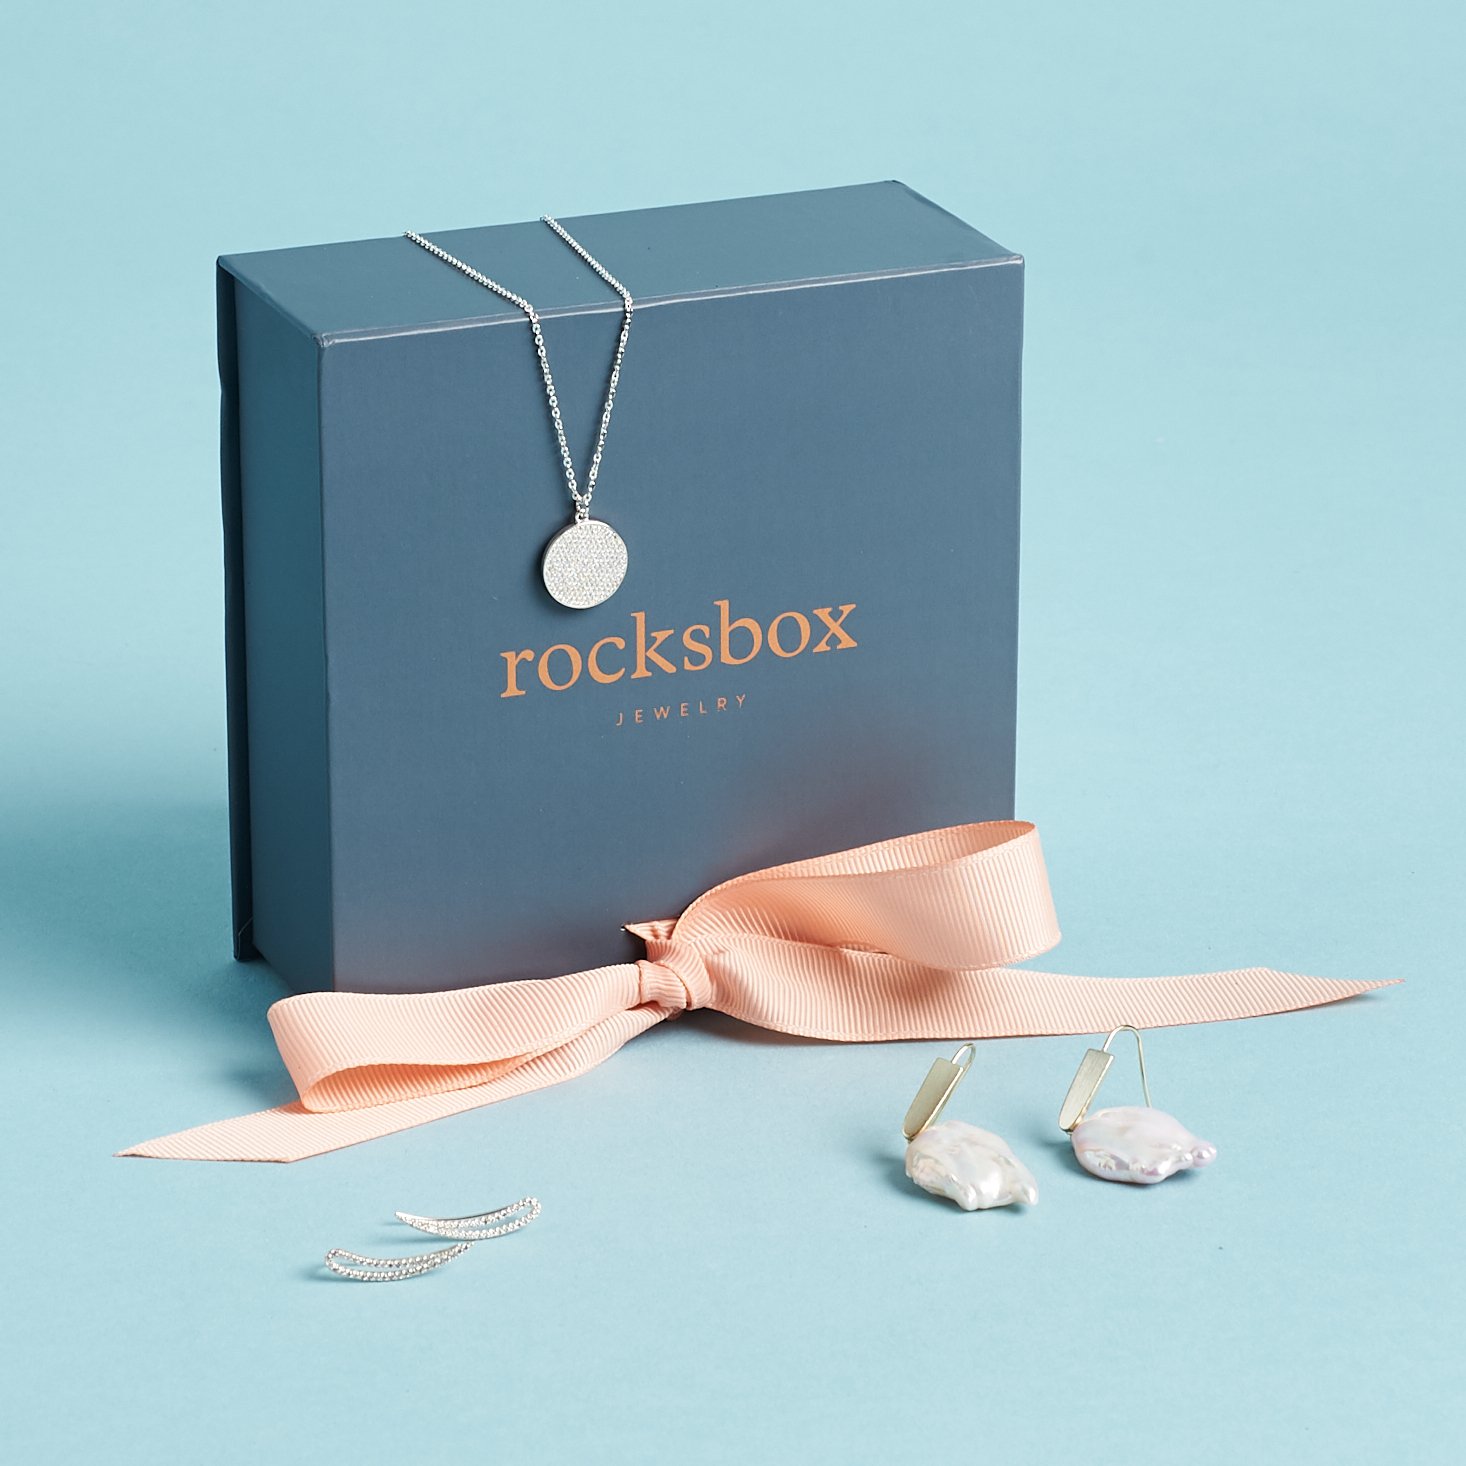 Want a Jewelry Subscription Box? Check Out These 12 Brands!